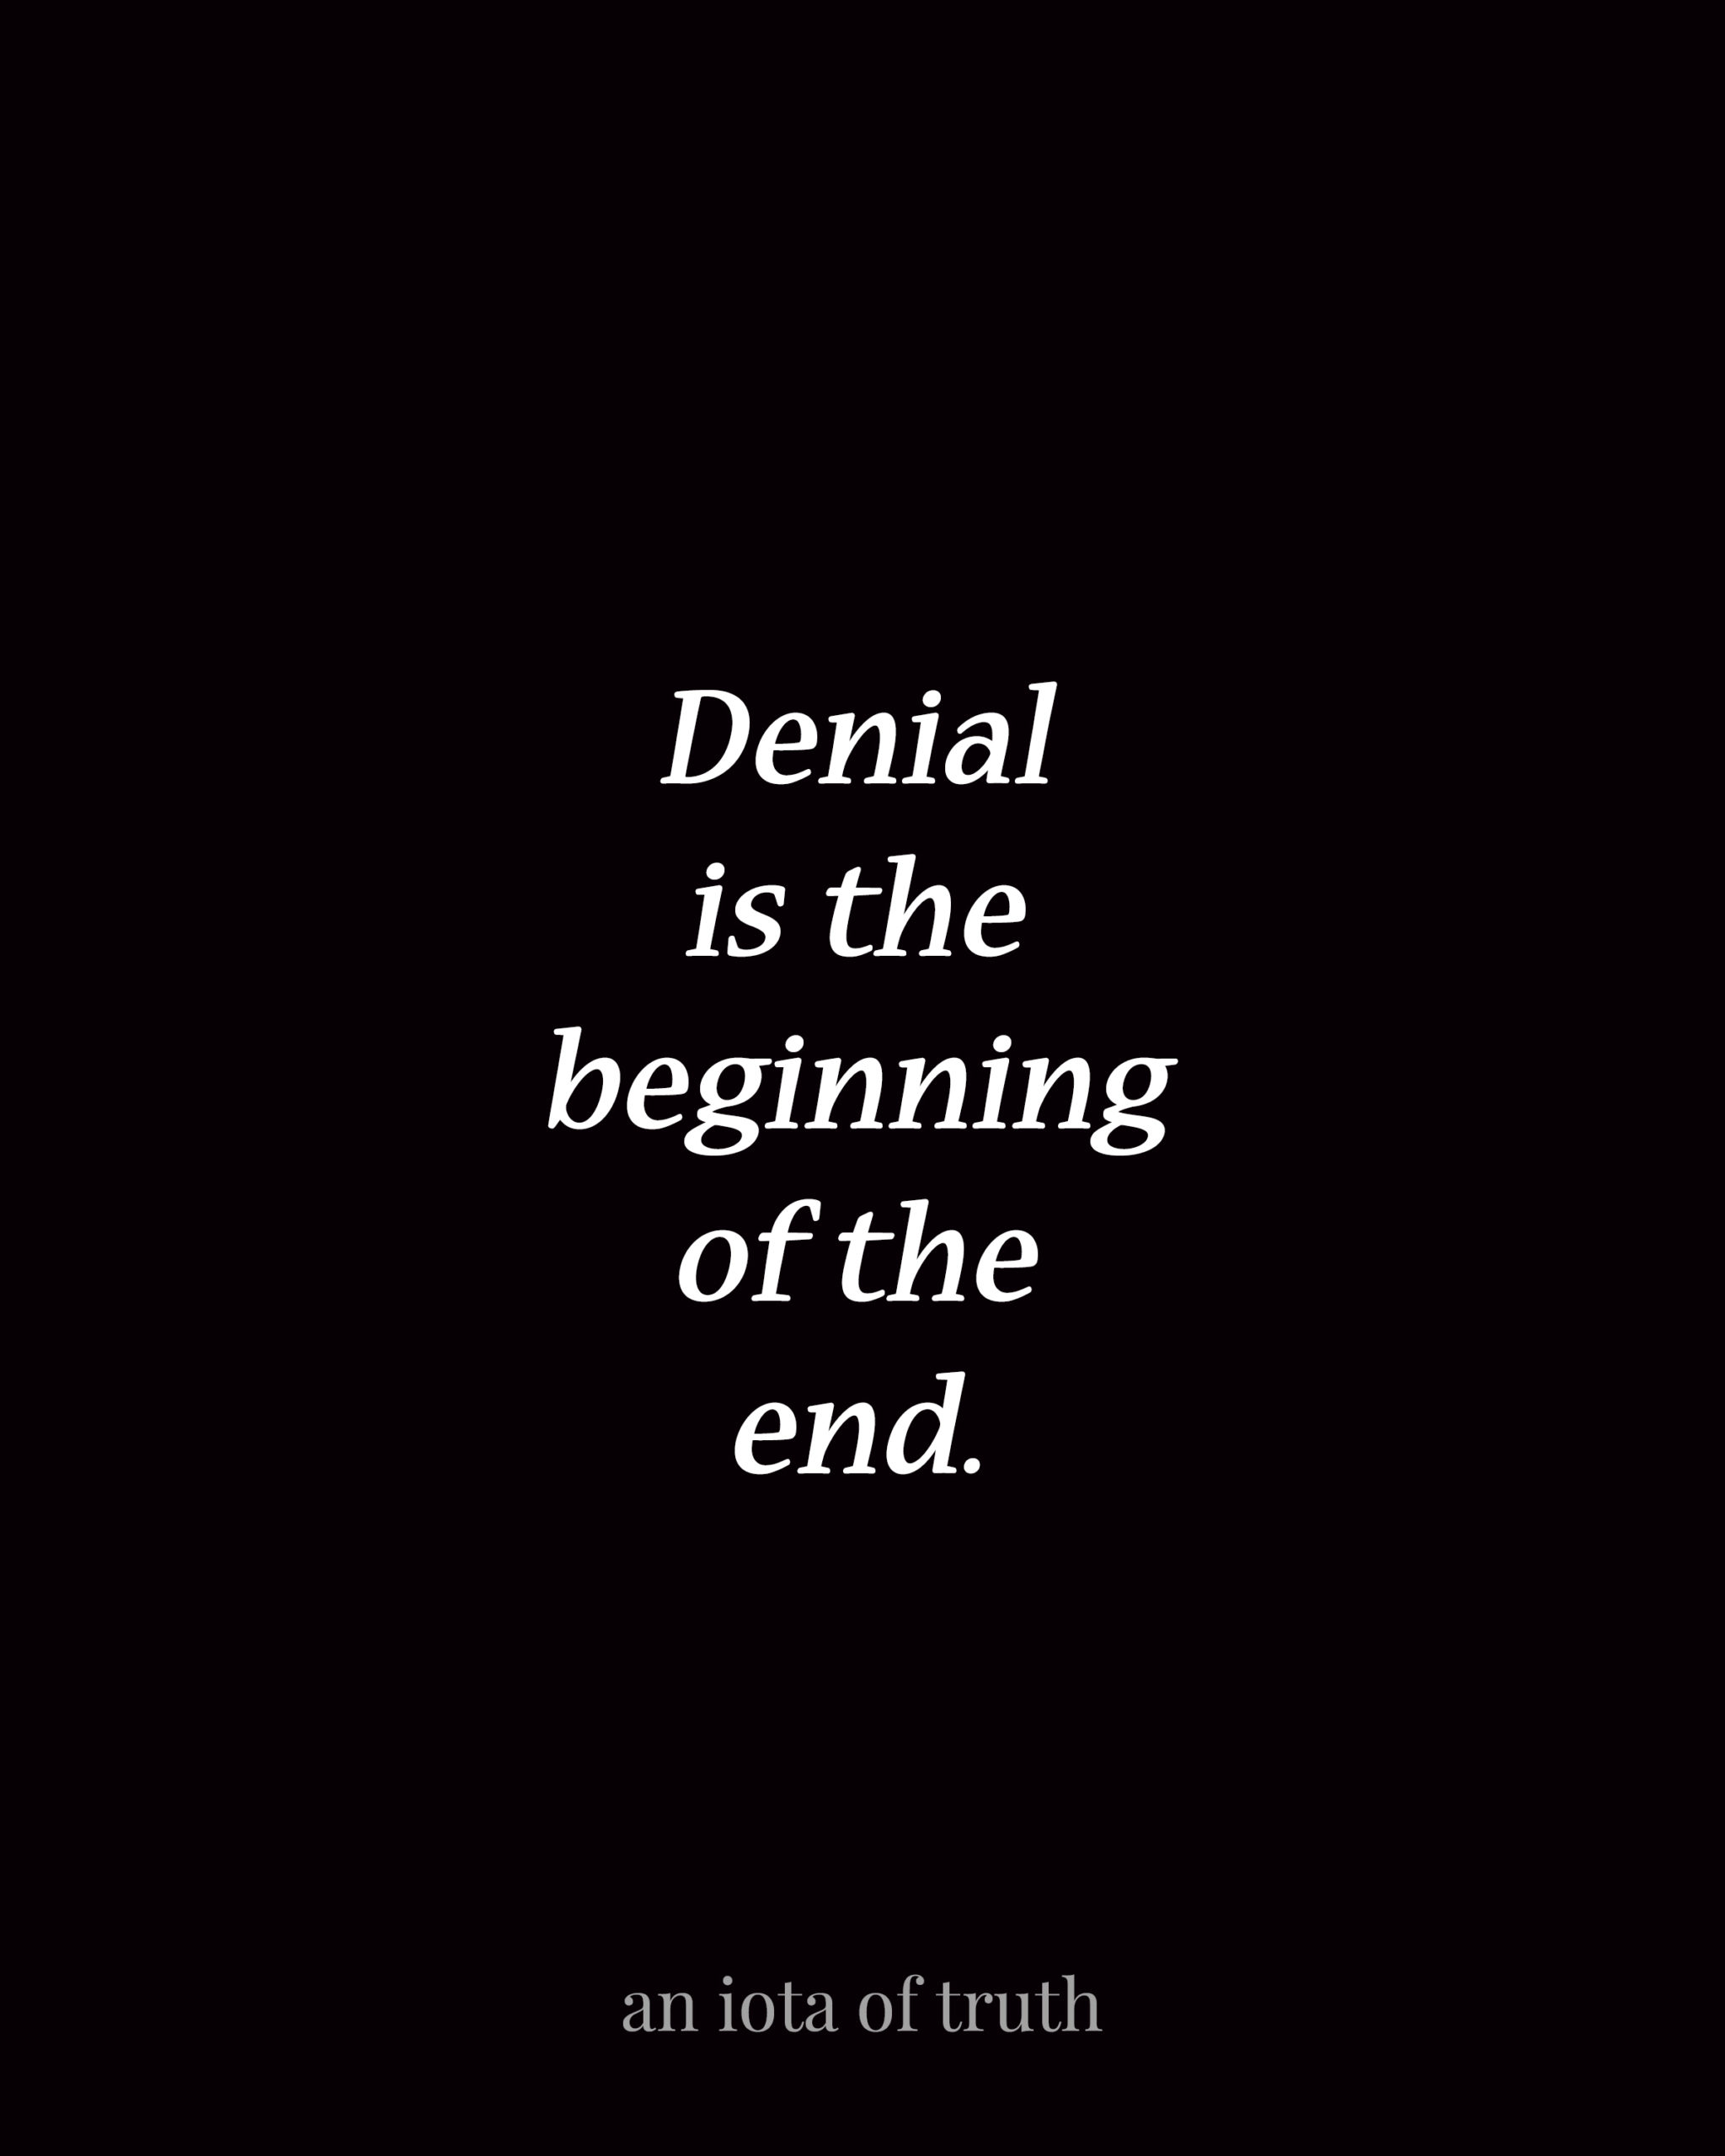 Denial is the beginning of the end.